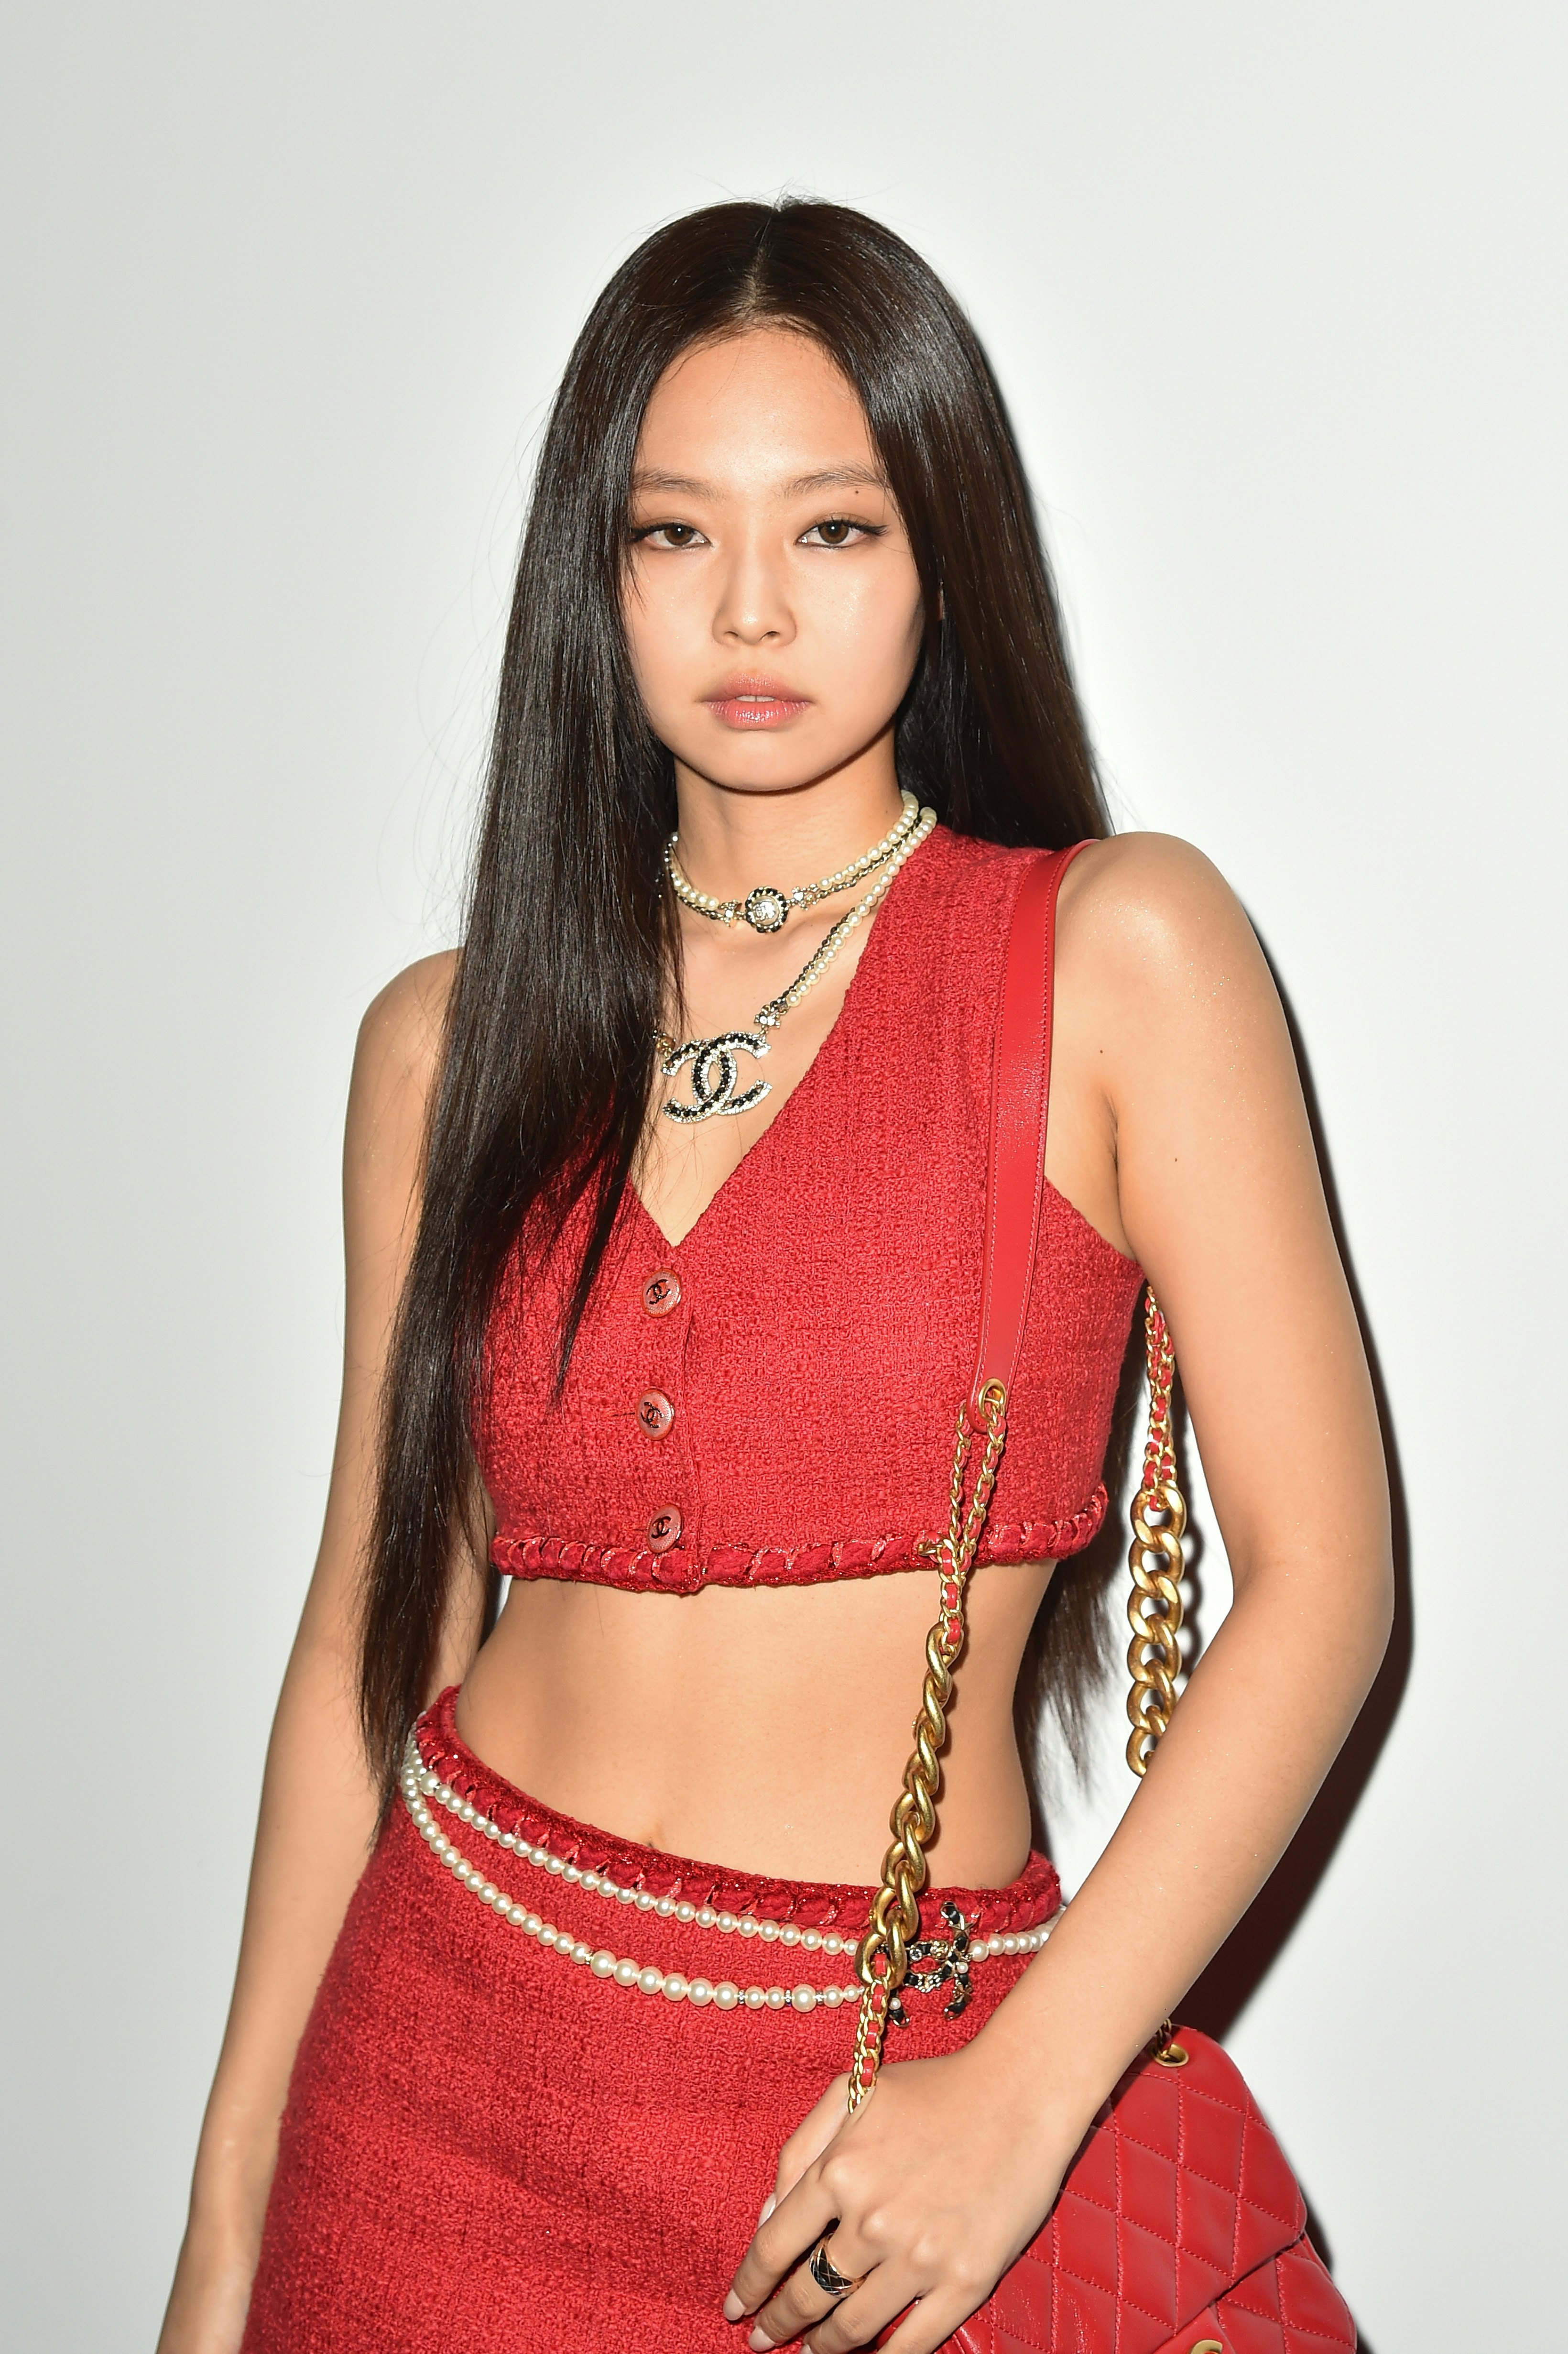 JENNIE STYLE on Instagram 220927  JENNIE at Tamburins Parfume   FOUNDRAE Jewelry  CERRIC knitwear  VintageHollywood Necklace   CHANEL Ring 